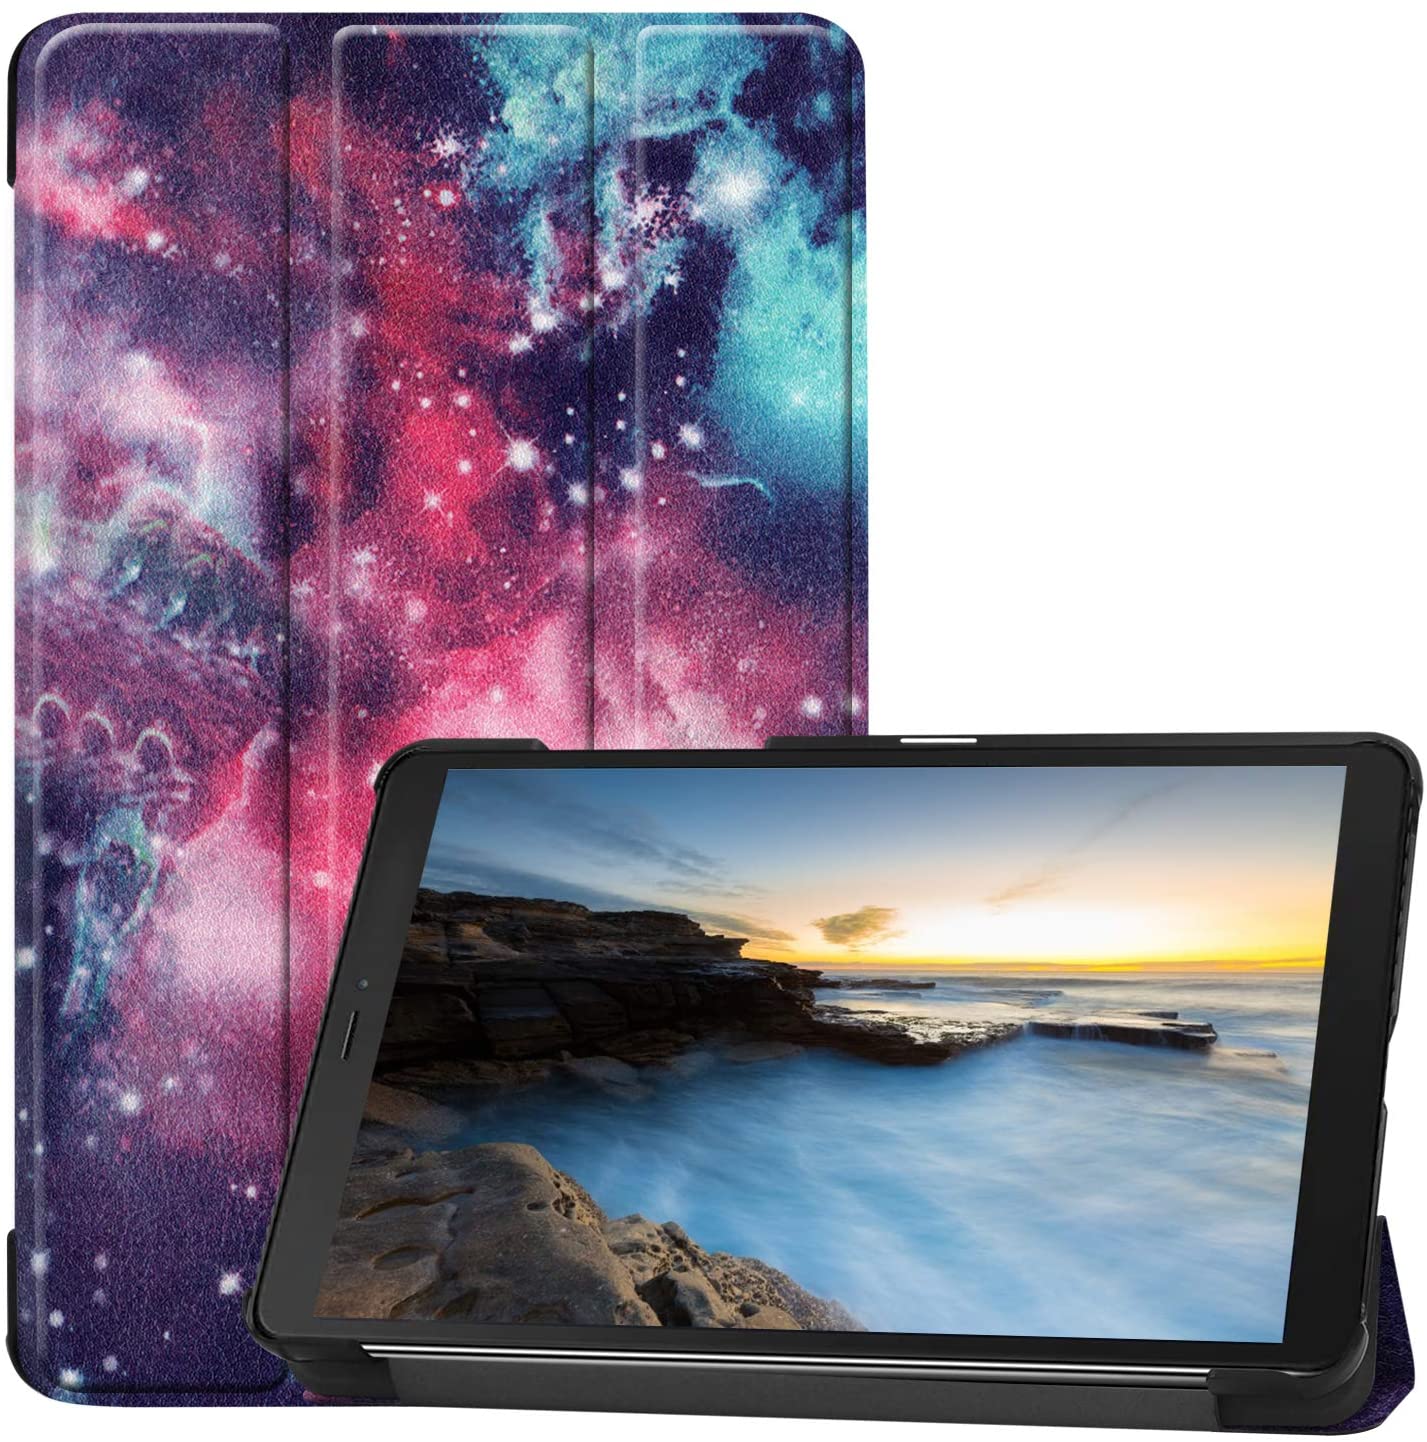 Smart Case for Samsung Tab A 8.0 2019, Ratesell Smart Trifold Stand Microfiber Lining Case Cover - VARIOUS DESIGNS. - e4cents